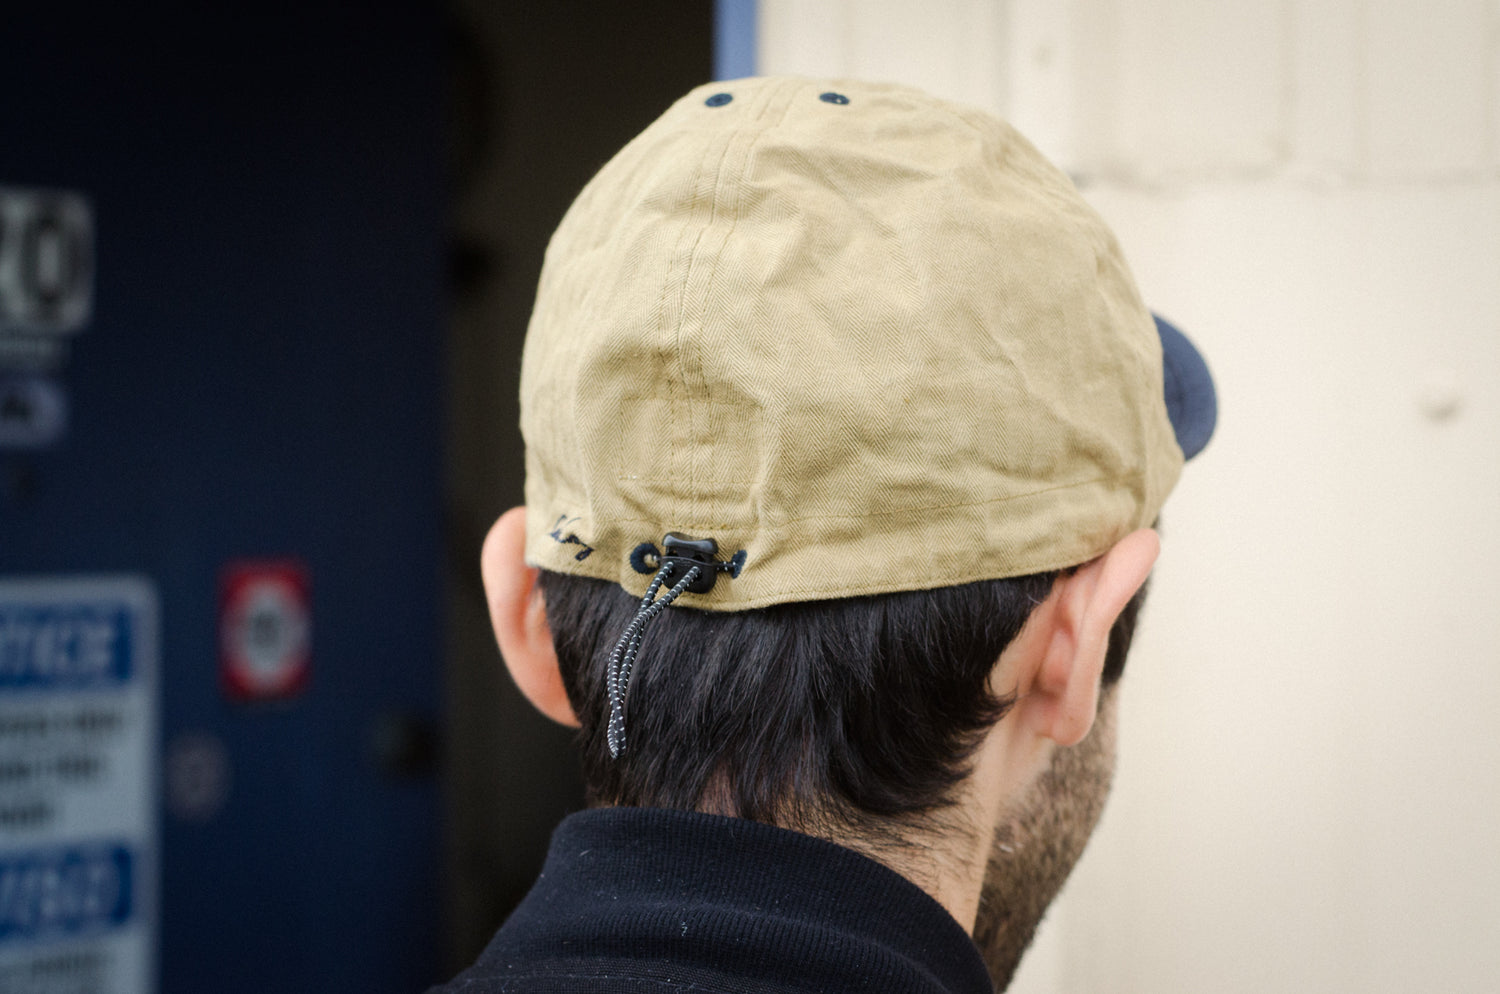 Blue Lug/RBW hats Works Rivendell Bicycle –